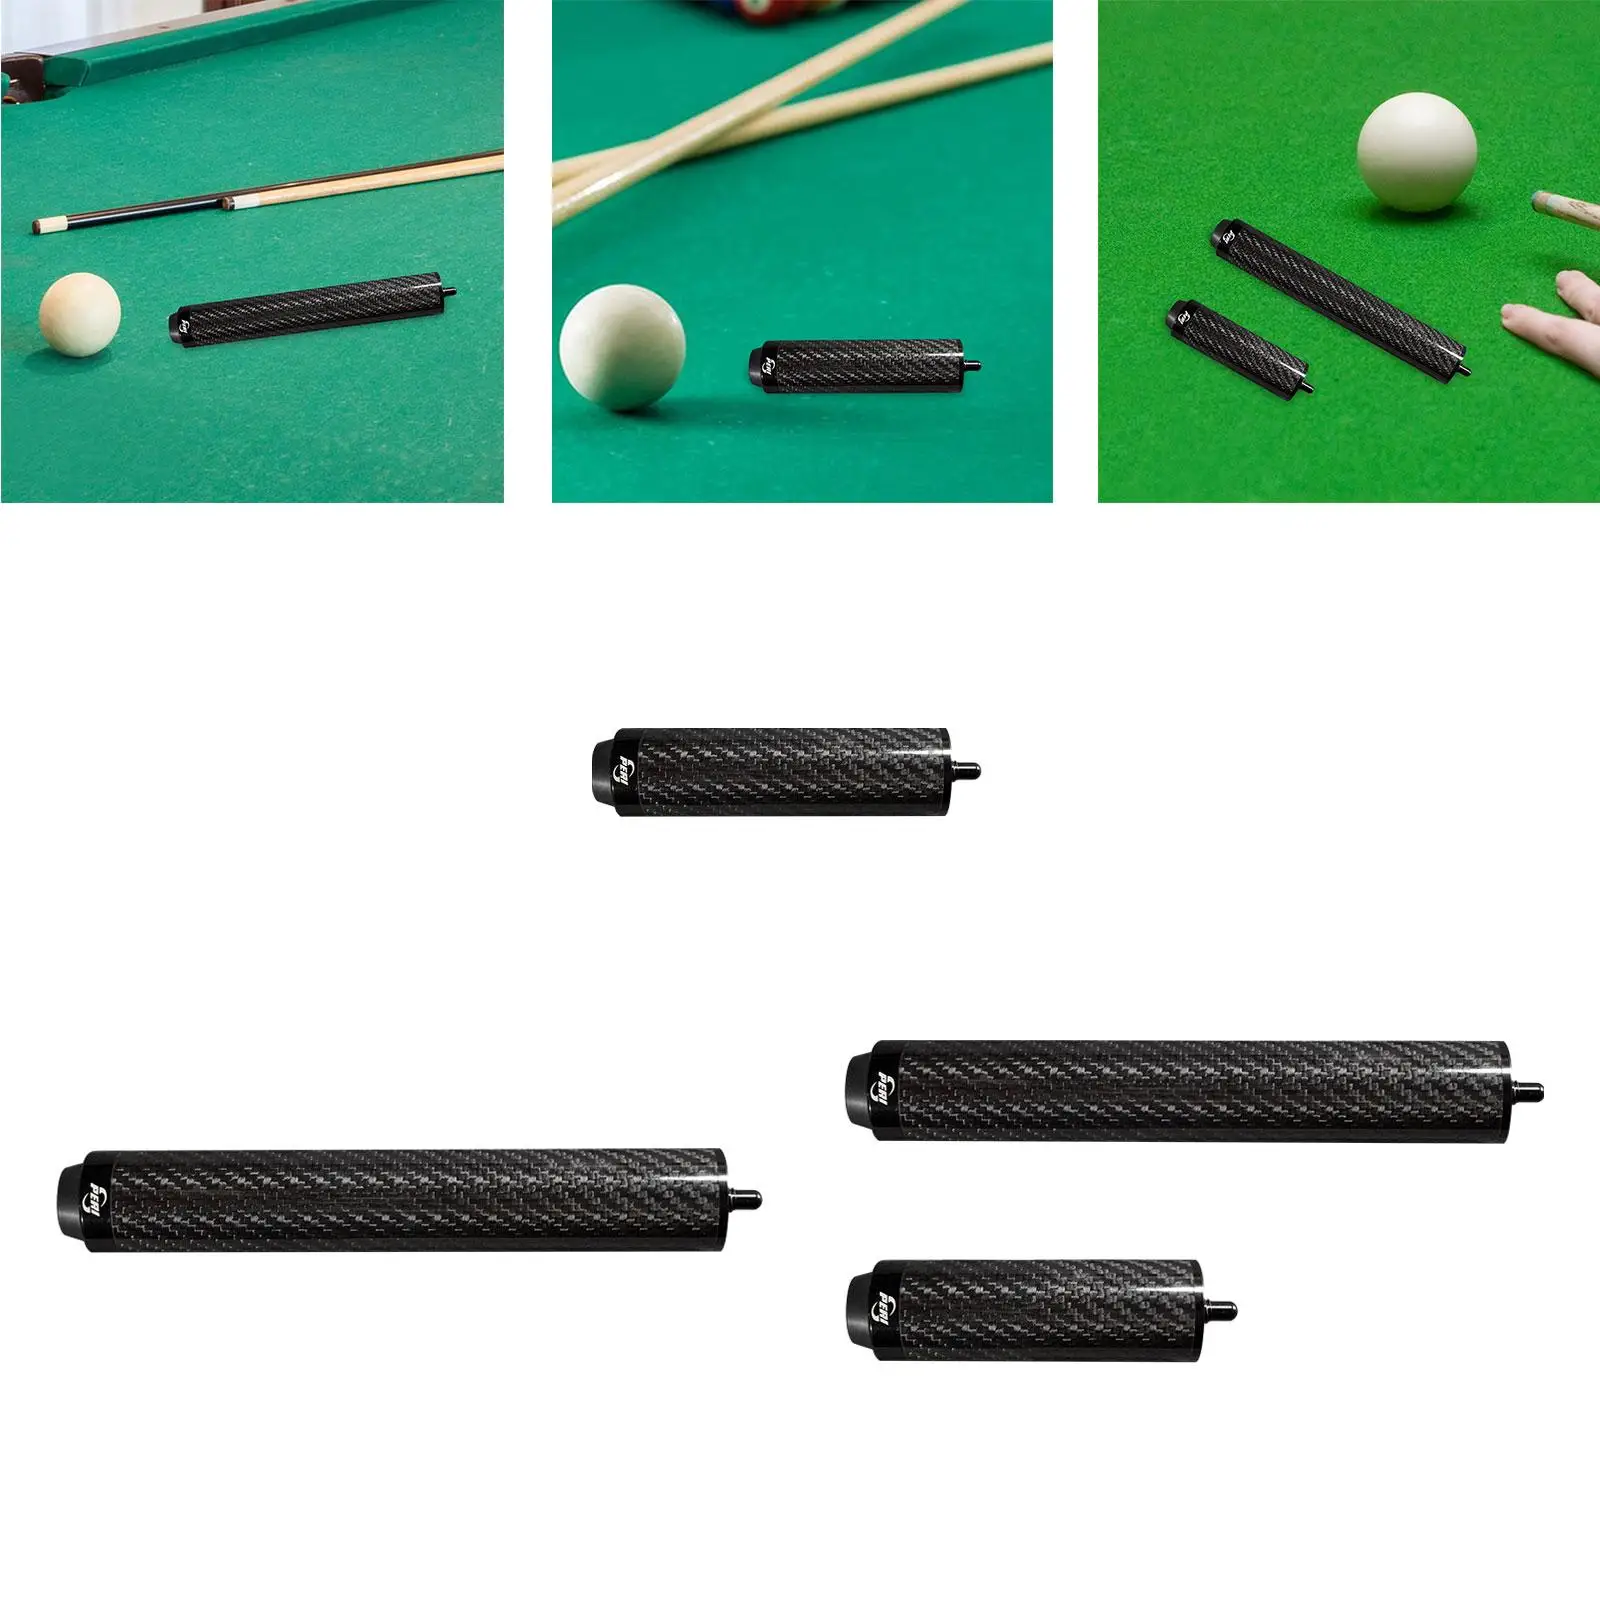 Billiards Pool Cue Extension Cue Rod Extension Billiard Connect Shaft for Athlete